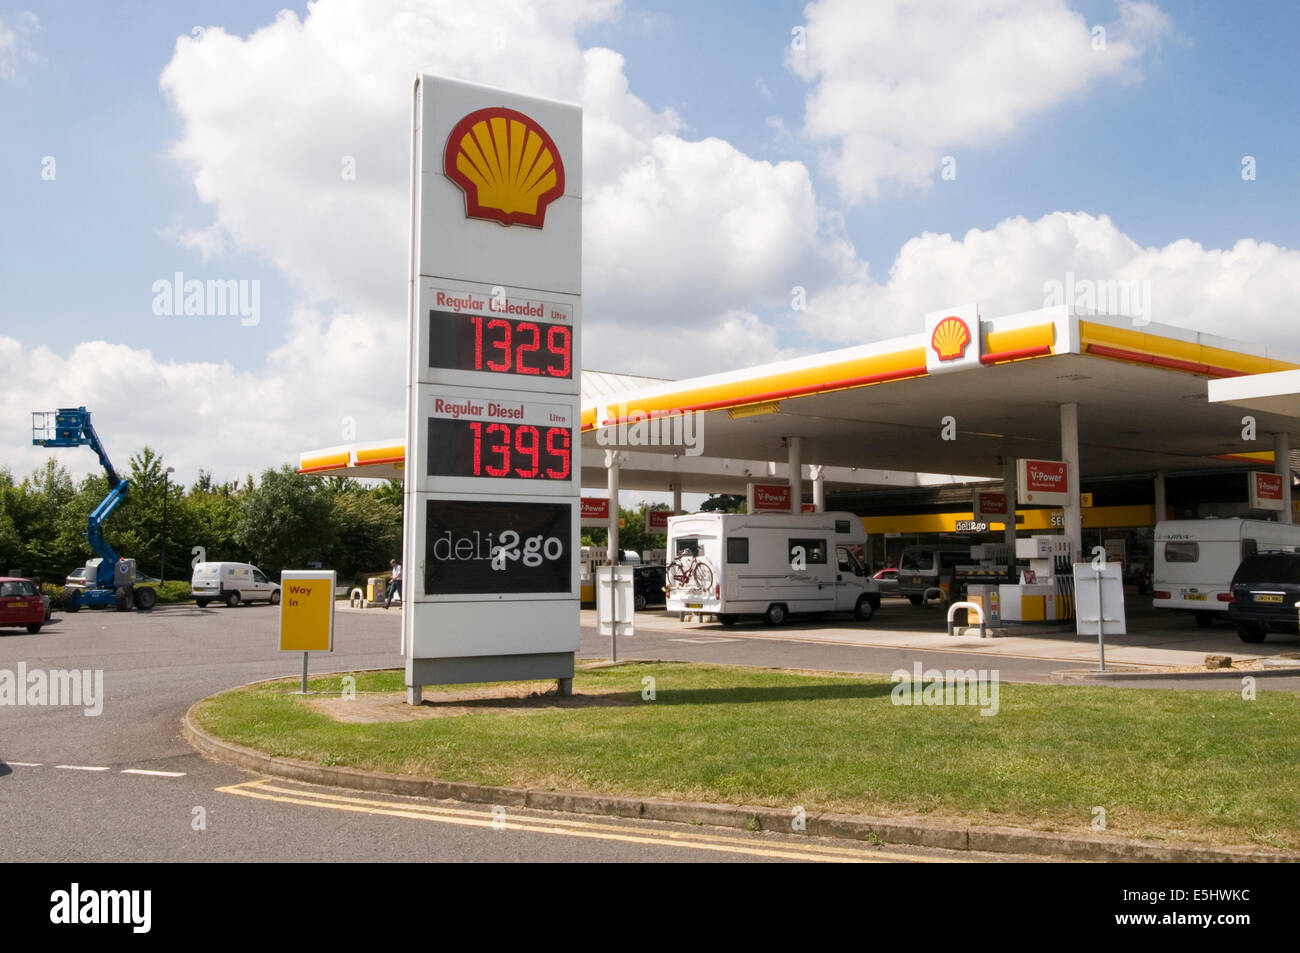 shell petrol station uk stations price prices fuel diesel expensive duty tax Stock Photo